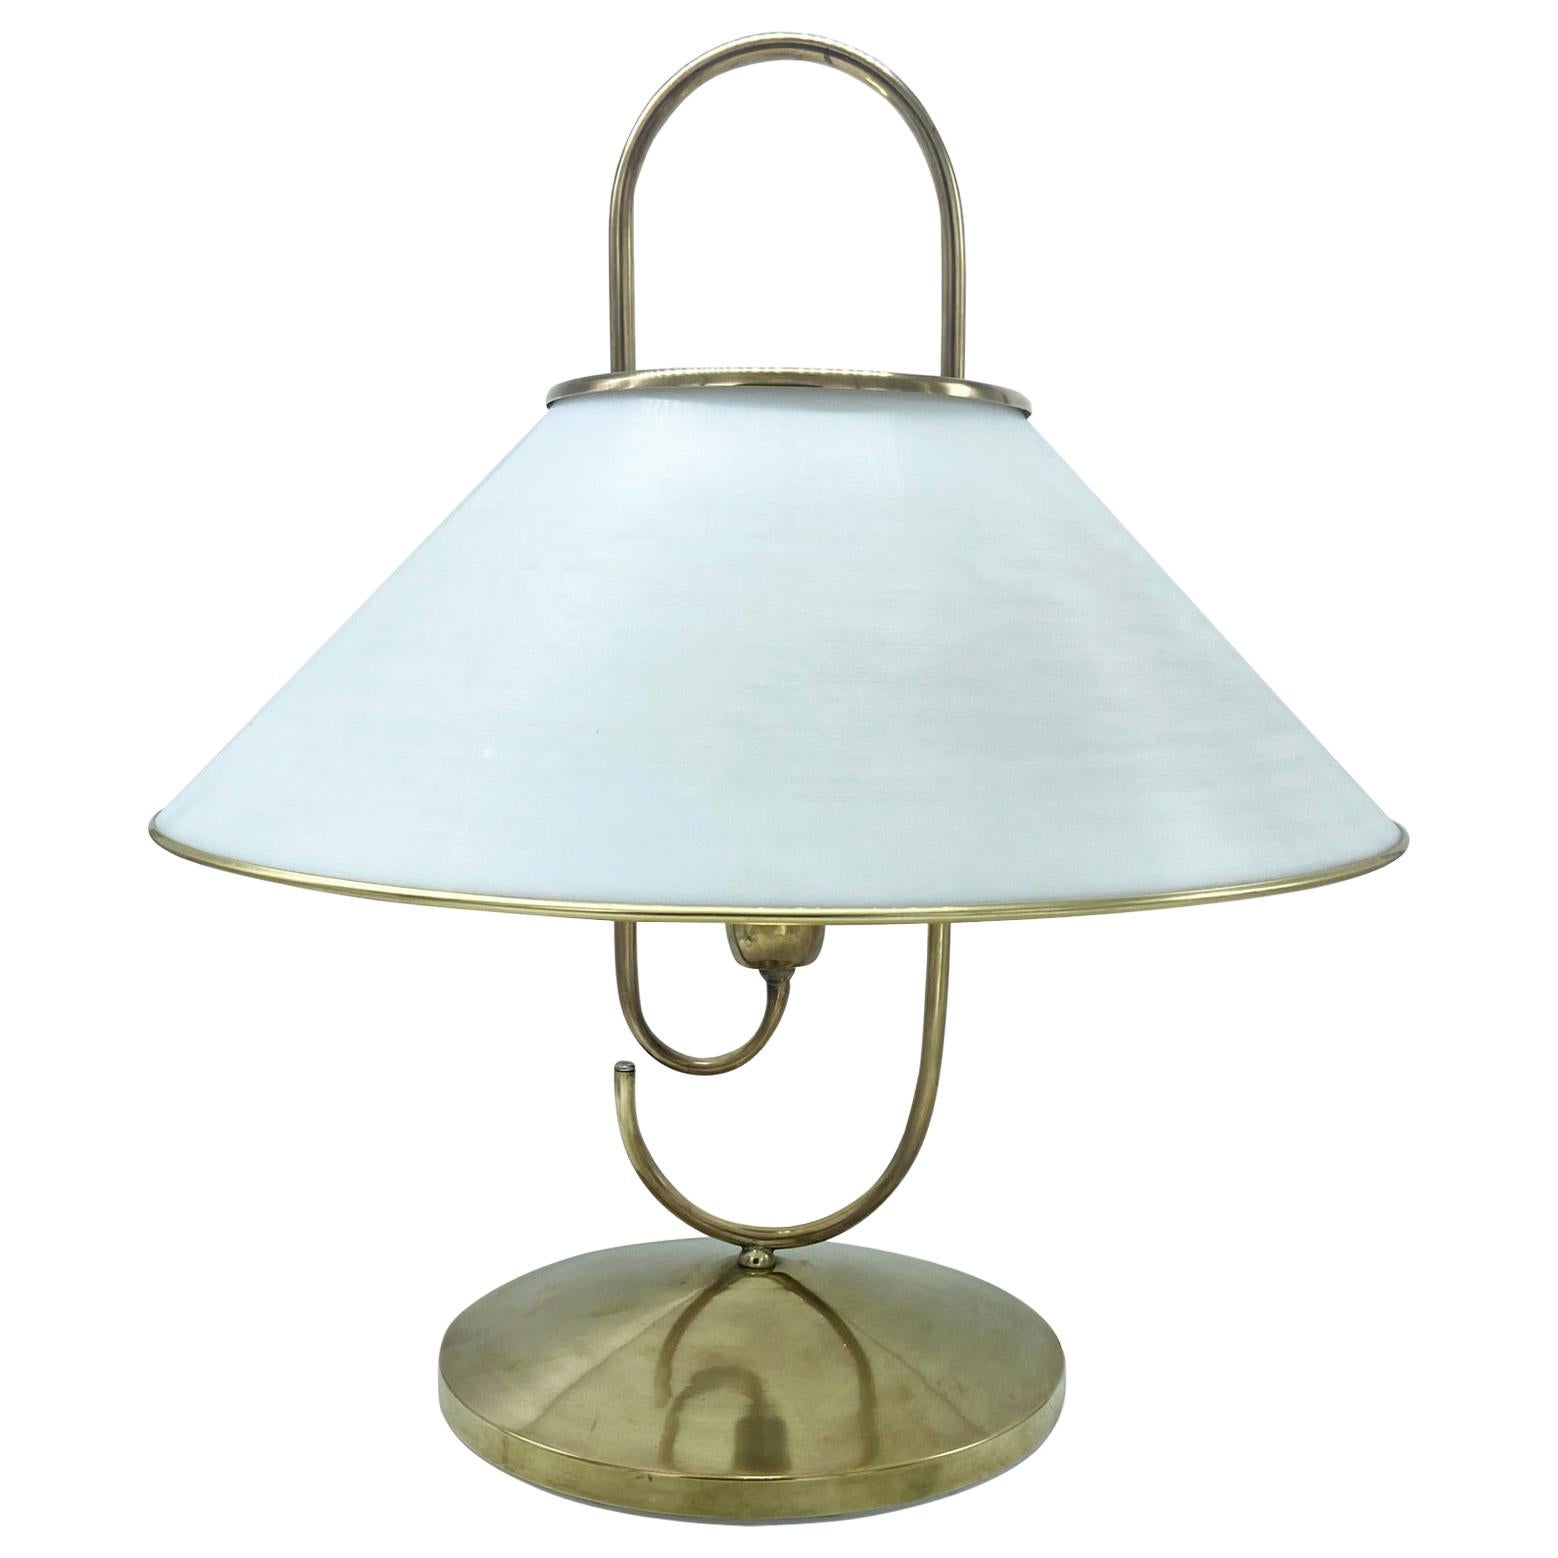 Arredoluce Style Brass and Pespex Handle Table Lamp, Italy, 1950s